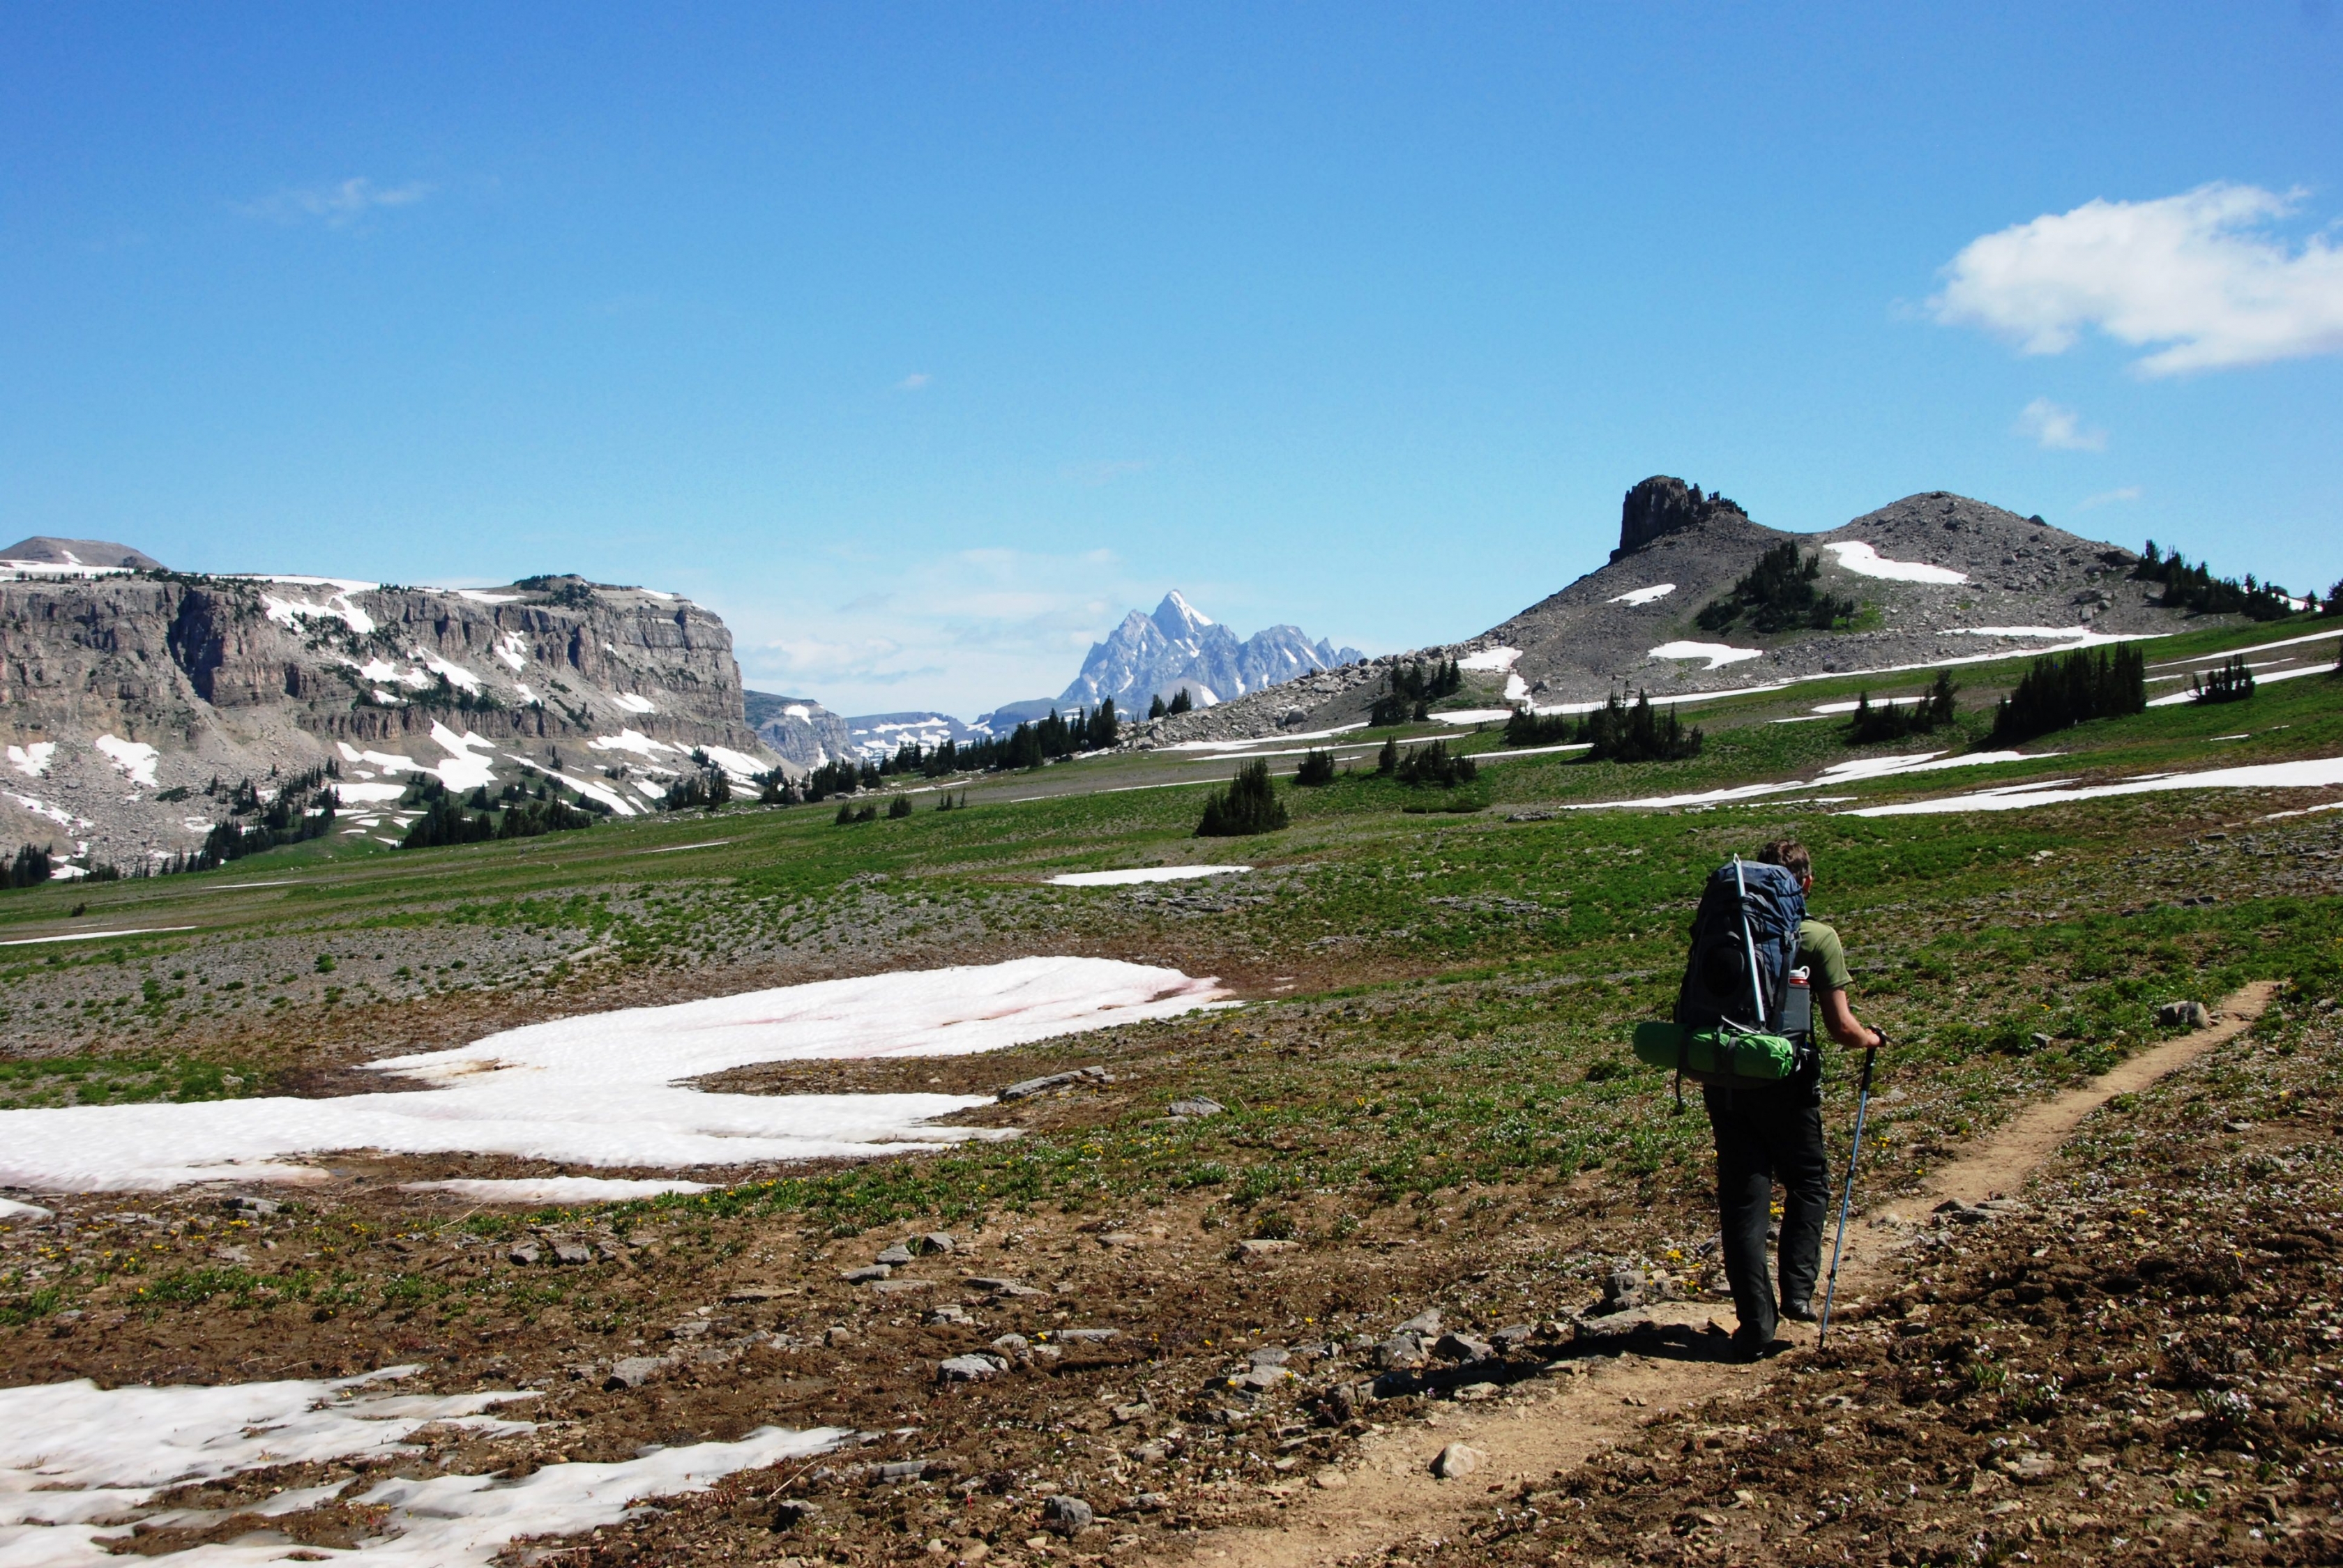 A solo hiker along a crest trail in Grand Teton National Park.